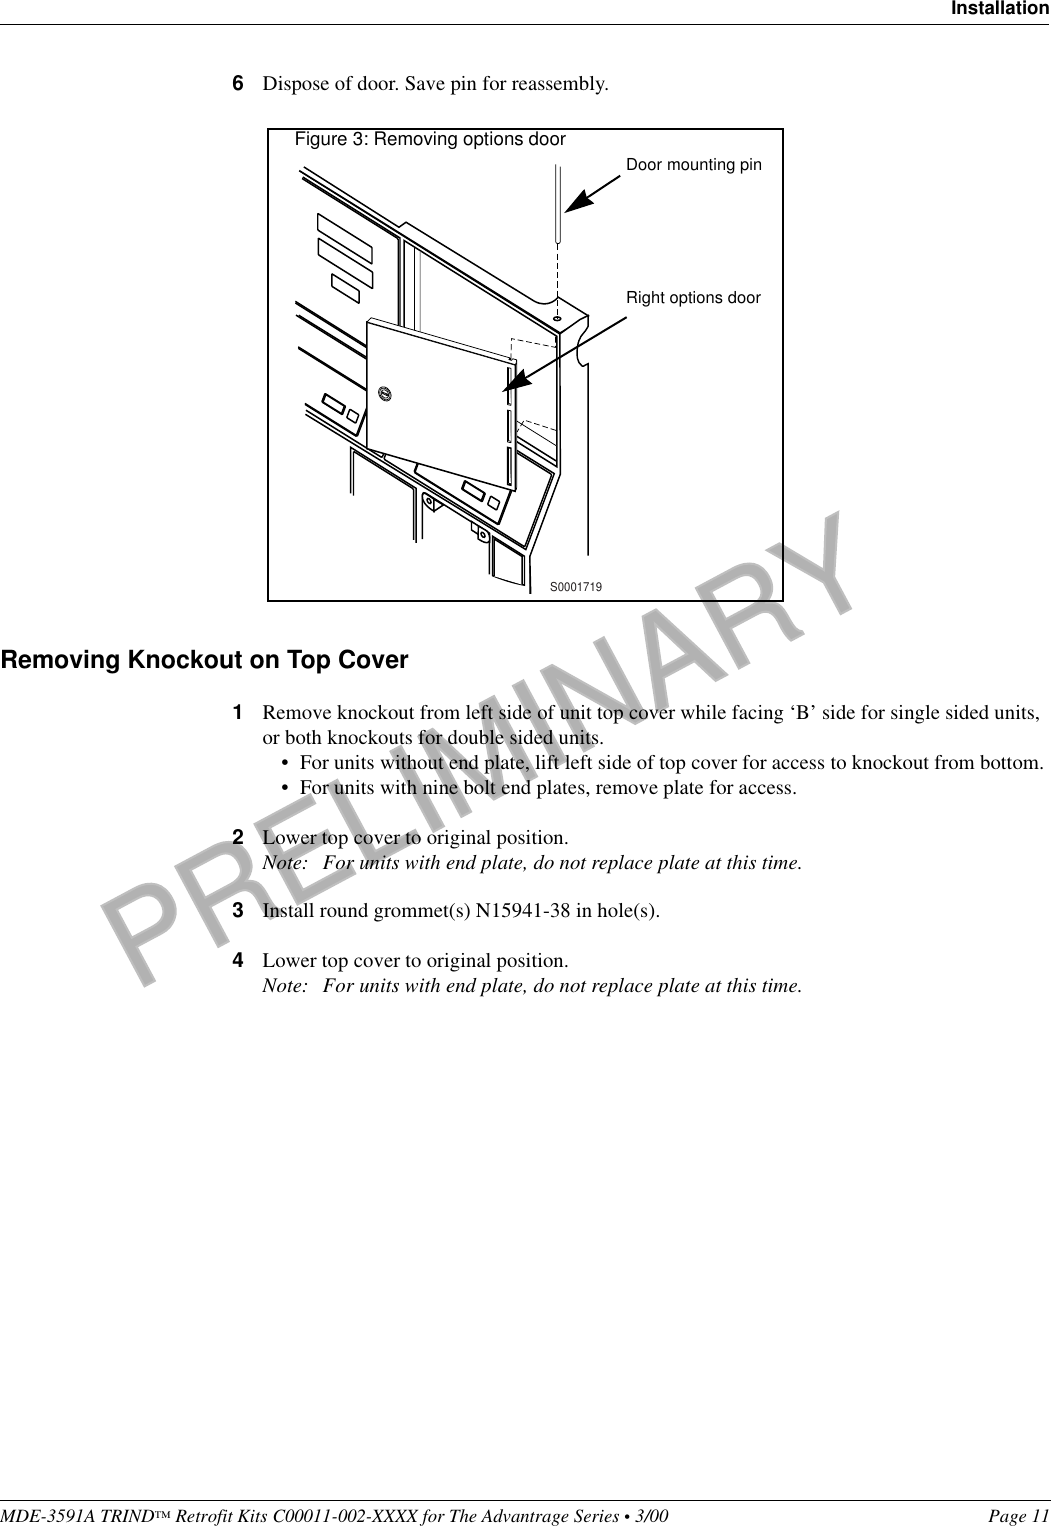 PRELIMINARYMDE-3591A TRIND™ Retrofit Kits C00011-002-XXXX for The Advantrage Series • 3/00  Page 11Installation6Dispose of door. Save pin for reassembly.Removing Knockout on Top Cover1Remove knockout from left side of unit top cover while facing ‘B’ side for single sided units, or both knockouts for double sided units. • For units without end plate, lift left side of top cover for access to knockout from bottom.• For units with nine bolt end plates, remove plate for access.2Lower top cover to original position.Note: For units with end plate, do not replace plate at this time.  3Install round grommet(s) N15941-38 in hole(s).4Lower top cover to original position.Note: For units with end plate, do not replace plate at this time.          Door mounting pinRight options doorFigure 3: Removing options doorS0001719